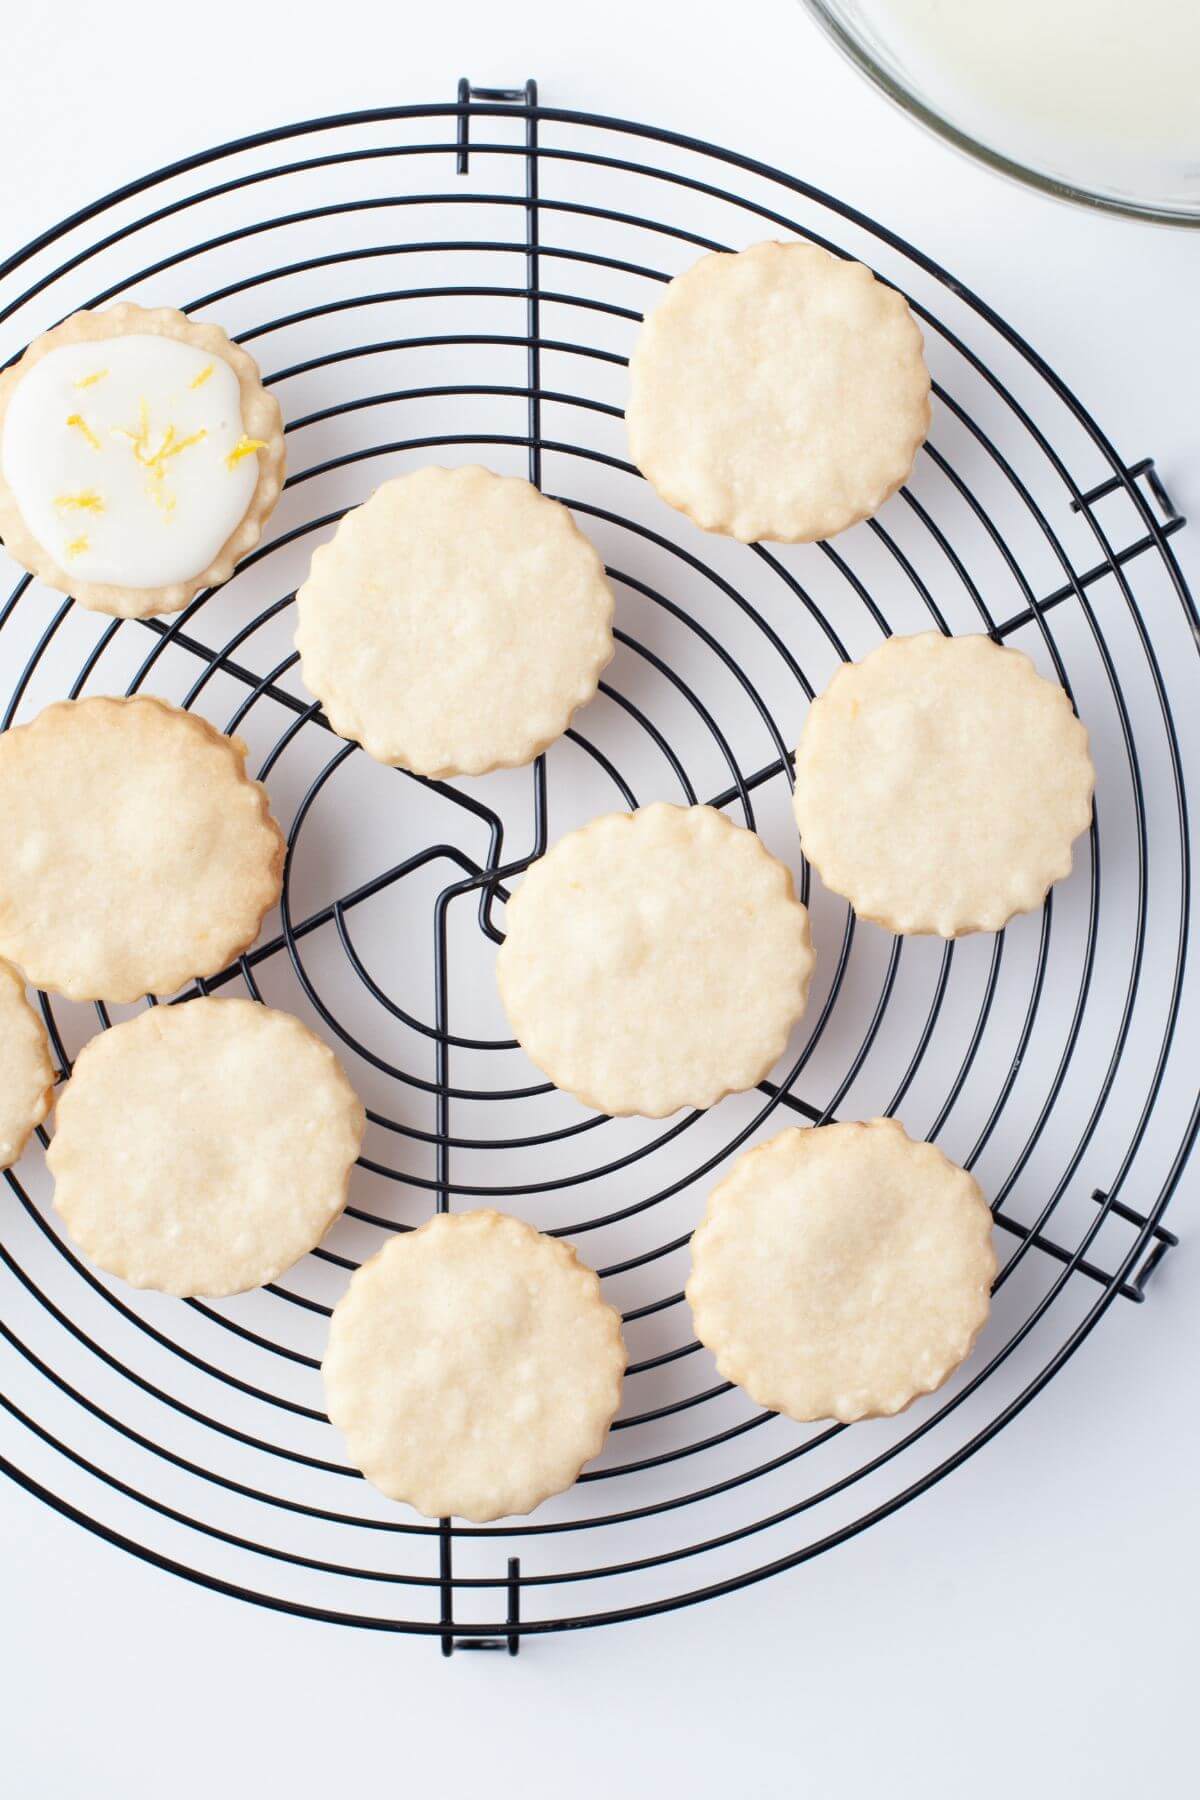 Cookies shown on wire rack, one cookie is iced.